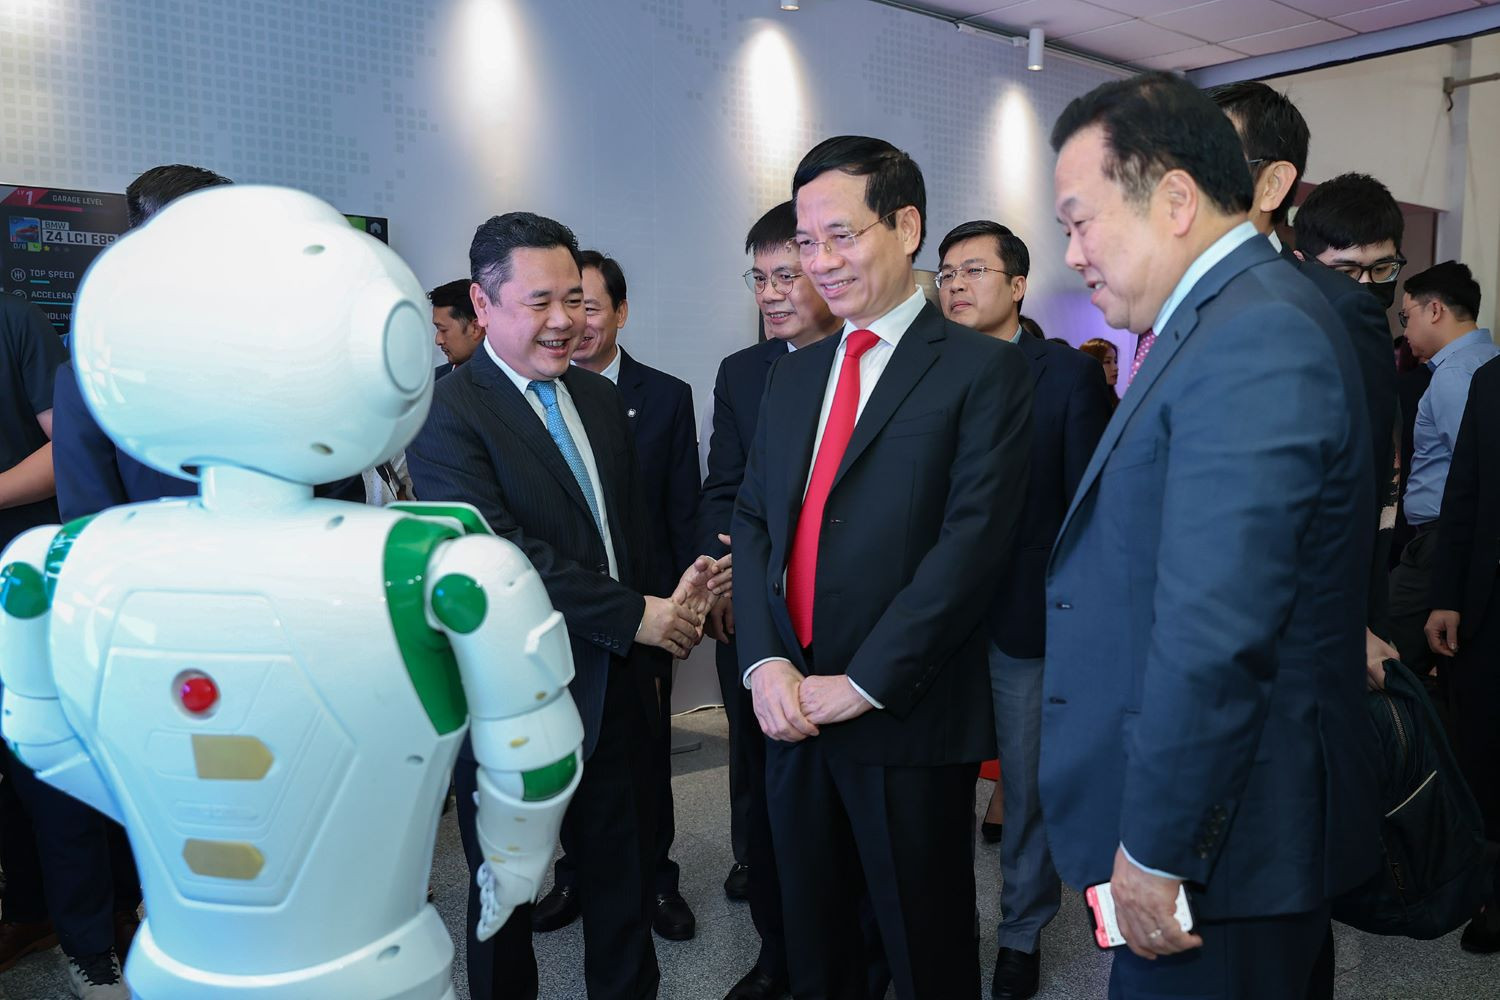 mobifone introduced robot application ai with bo truong nguyen manh hung in the middle of the year to receive the 30th anniversary of the founding of the company.jpg